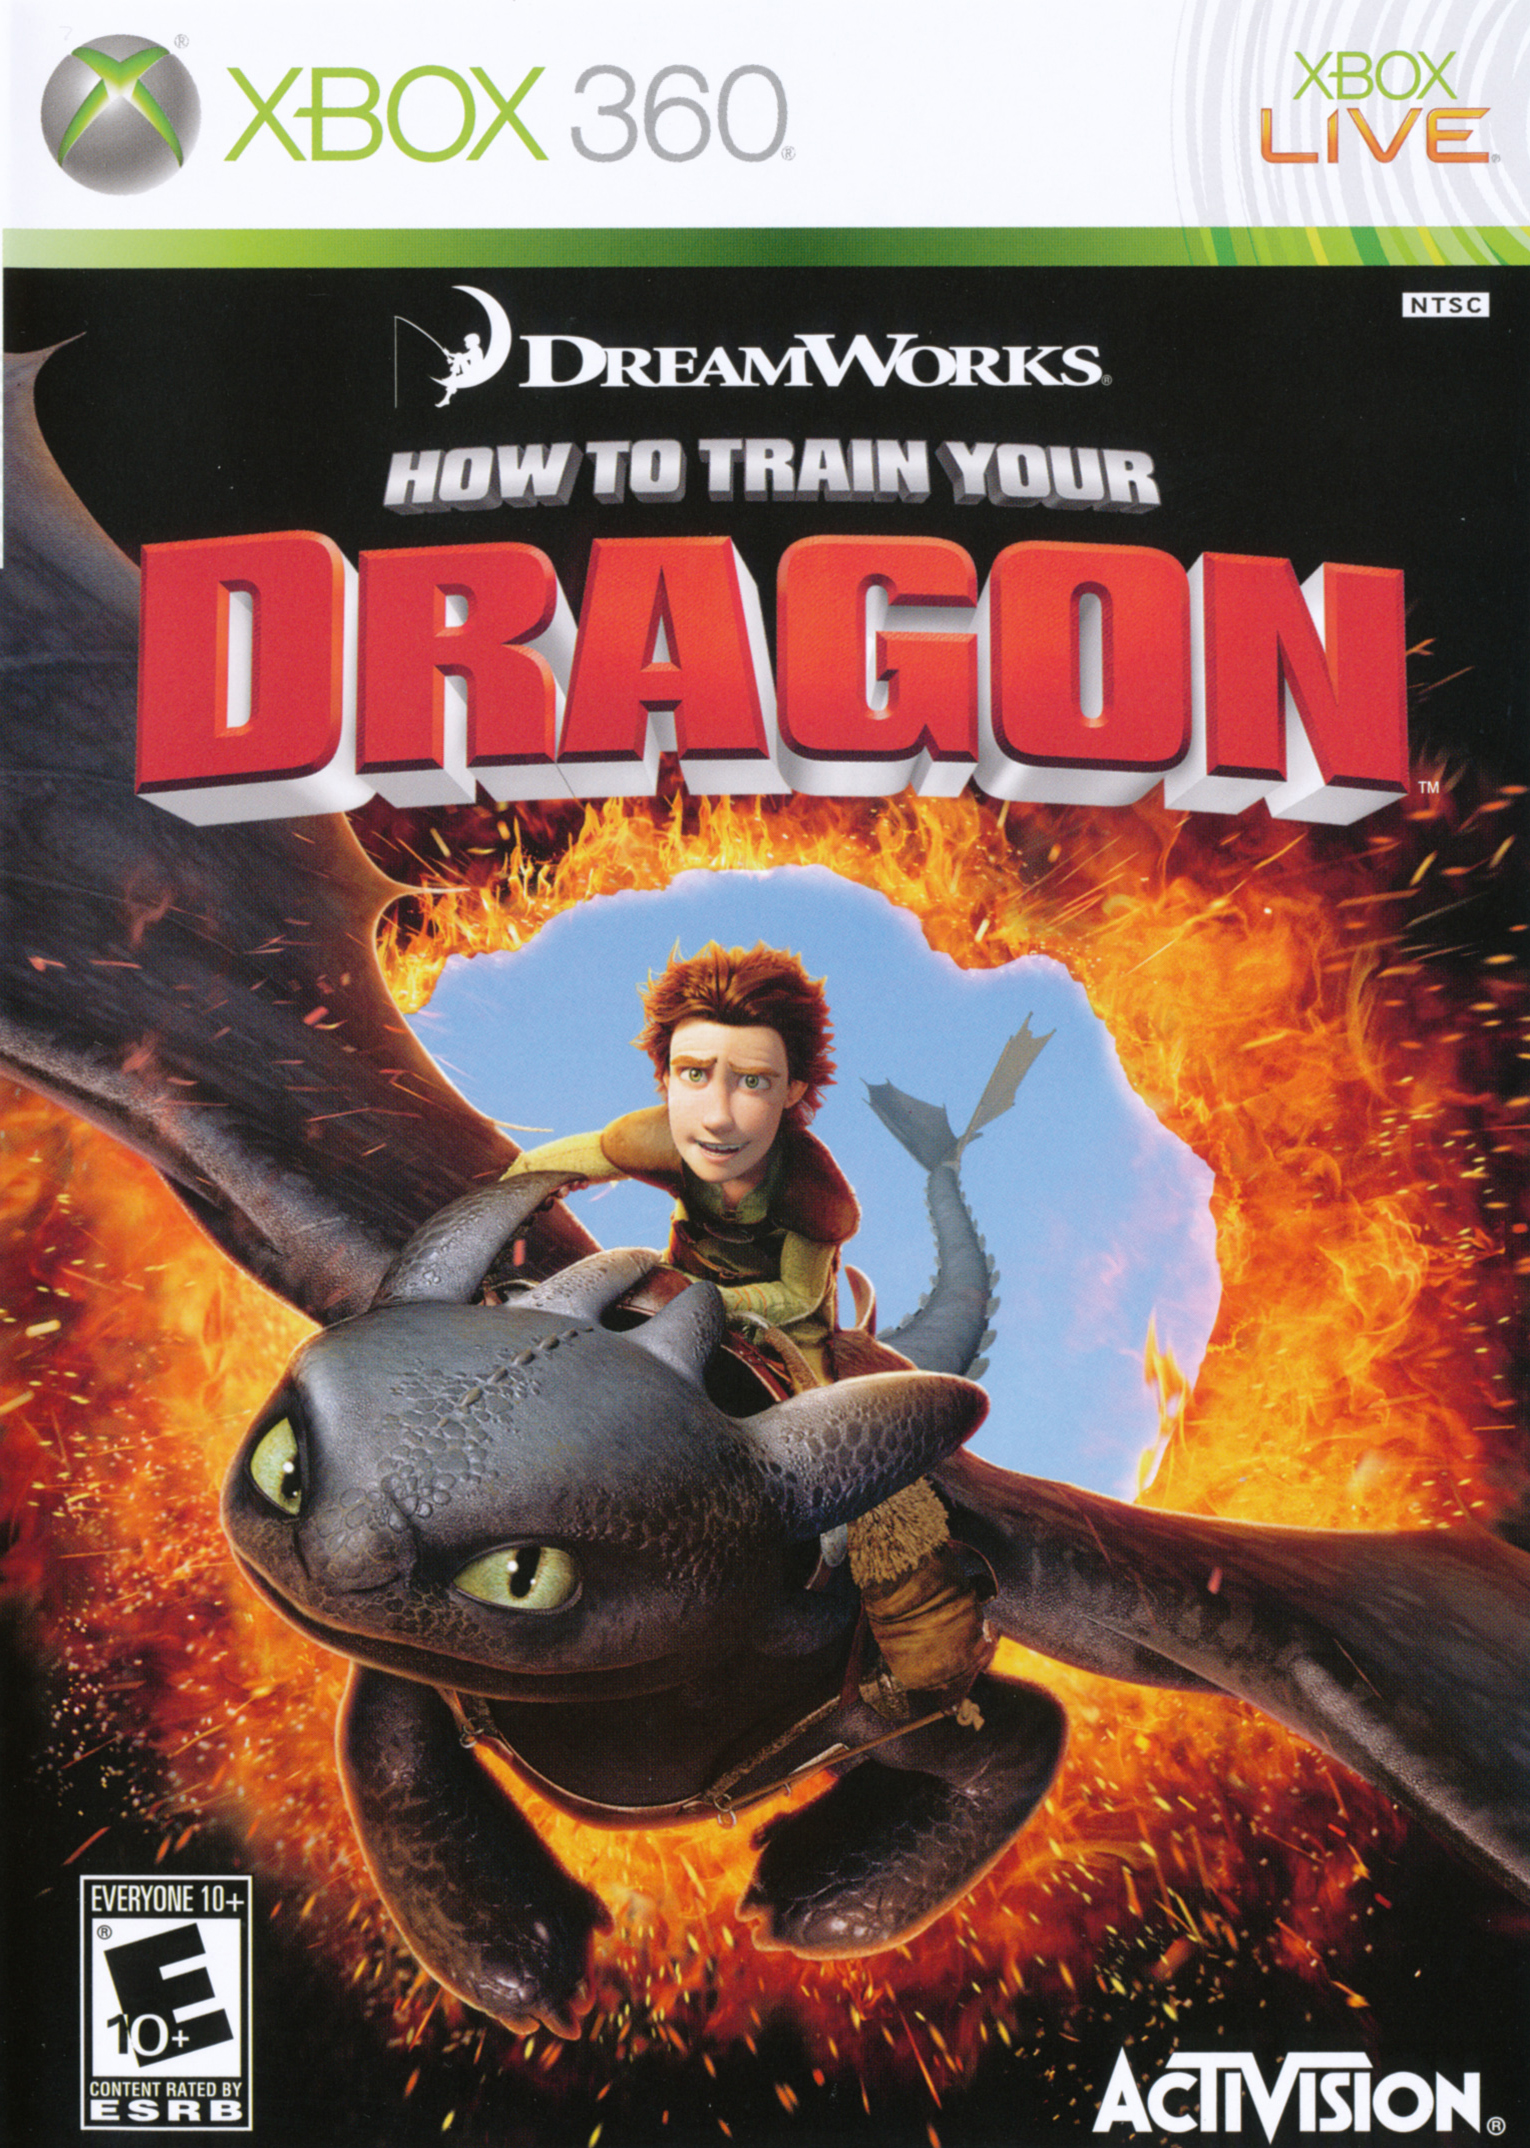 How To Train Your Dragon/Xbox 360